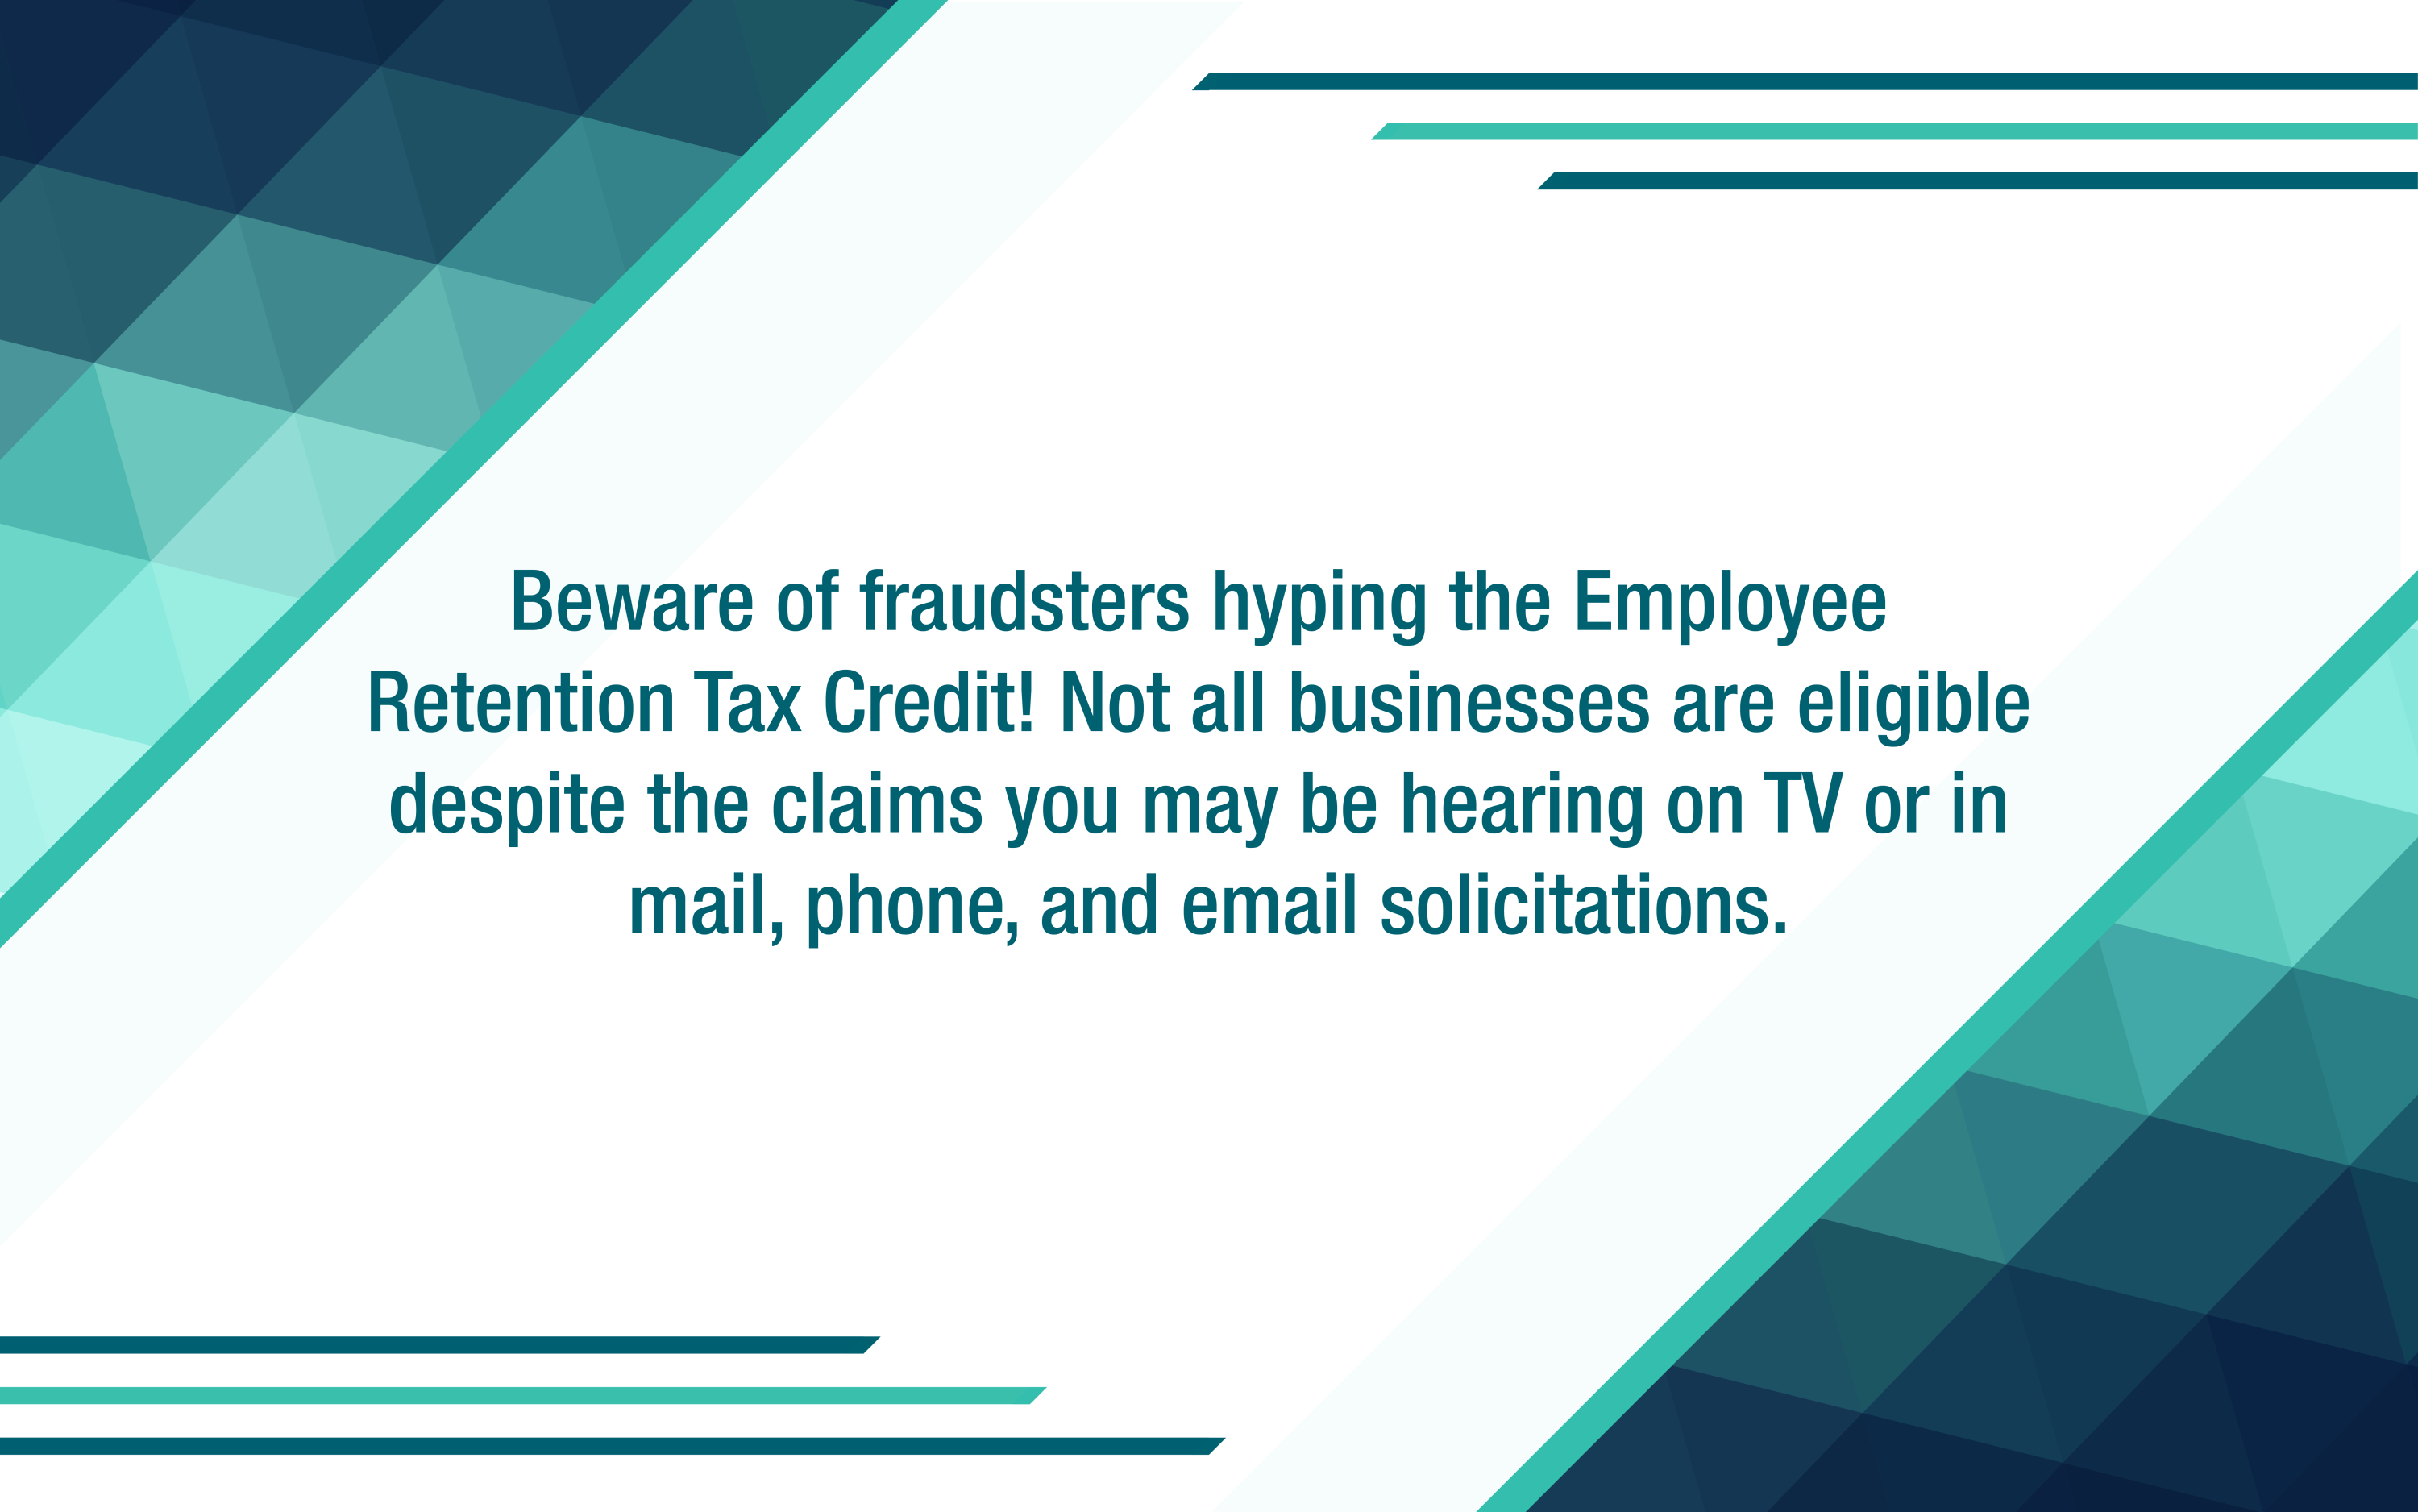 The IRS warns businesses about ERTC scams